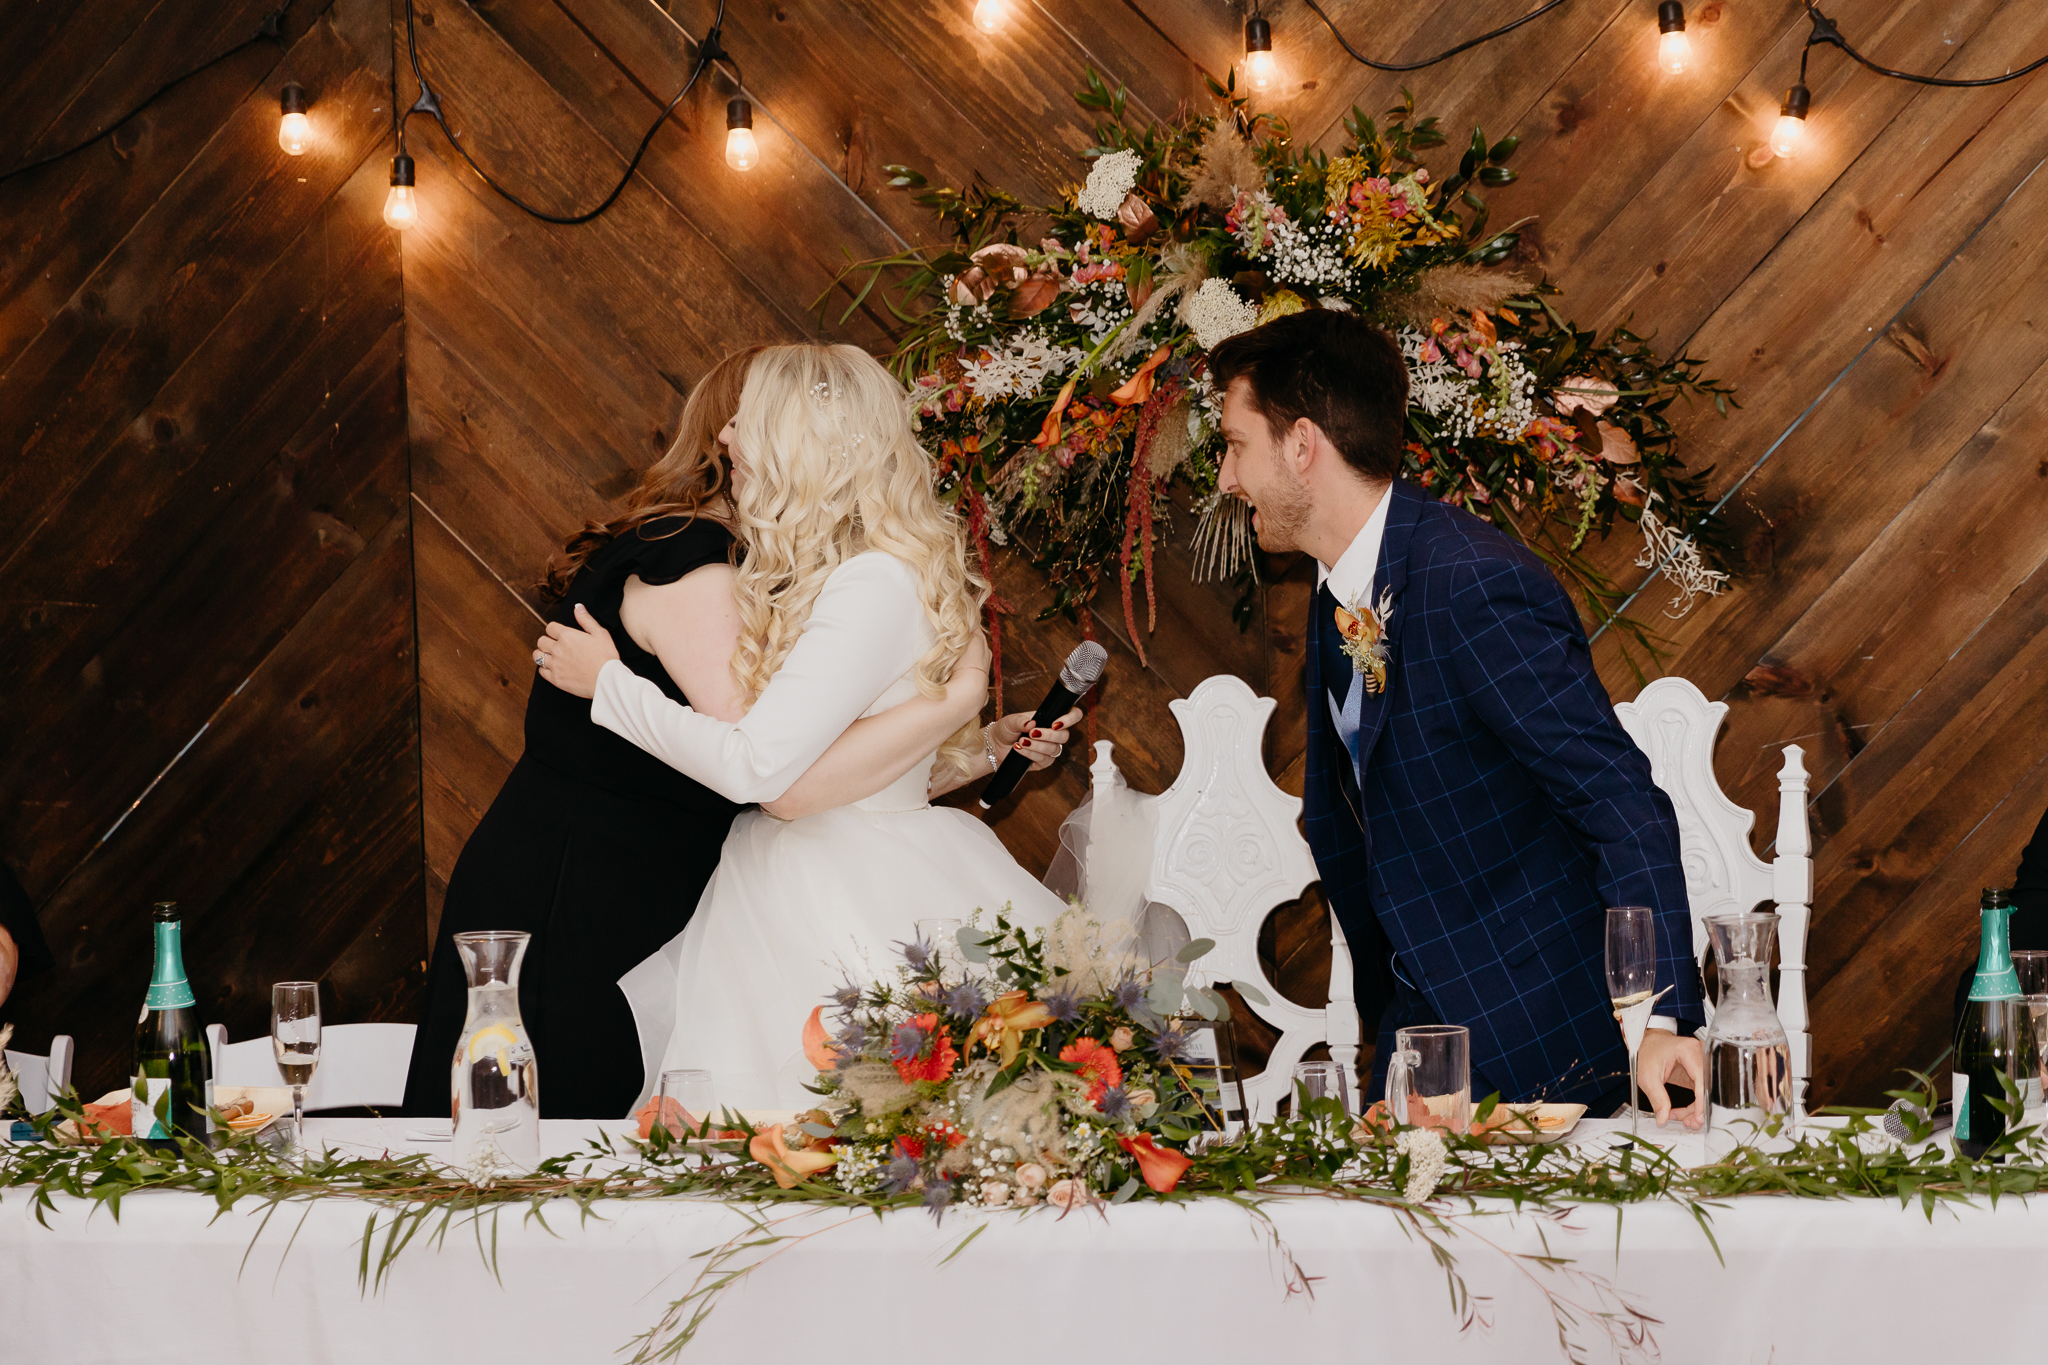 Groom and bride sitting at table, toast the maid of honor after giving a speech in a white tent wedding